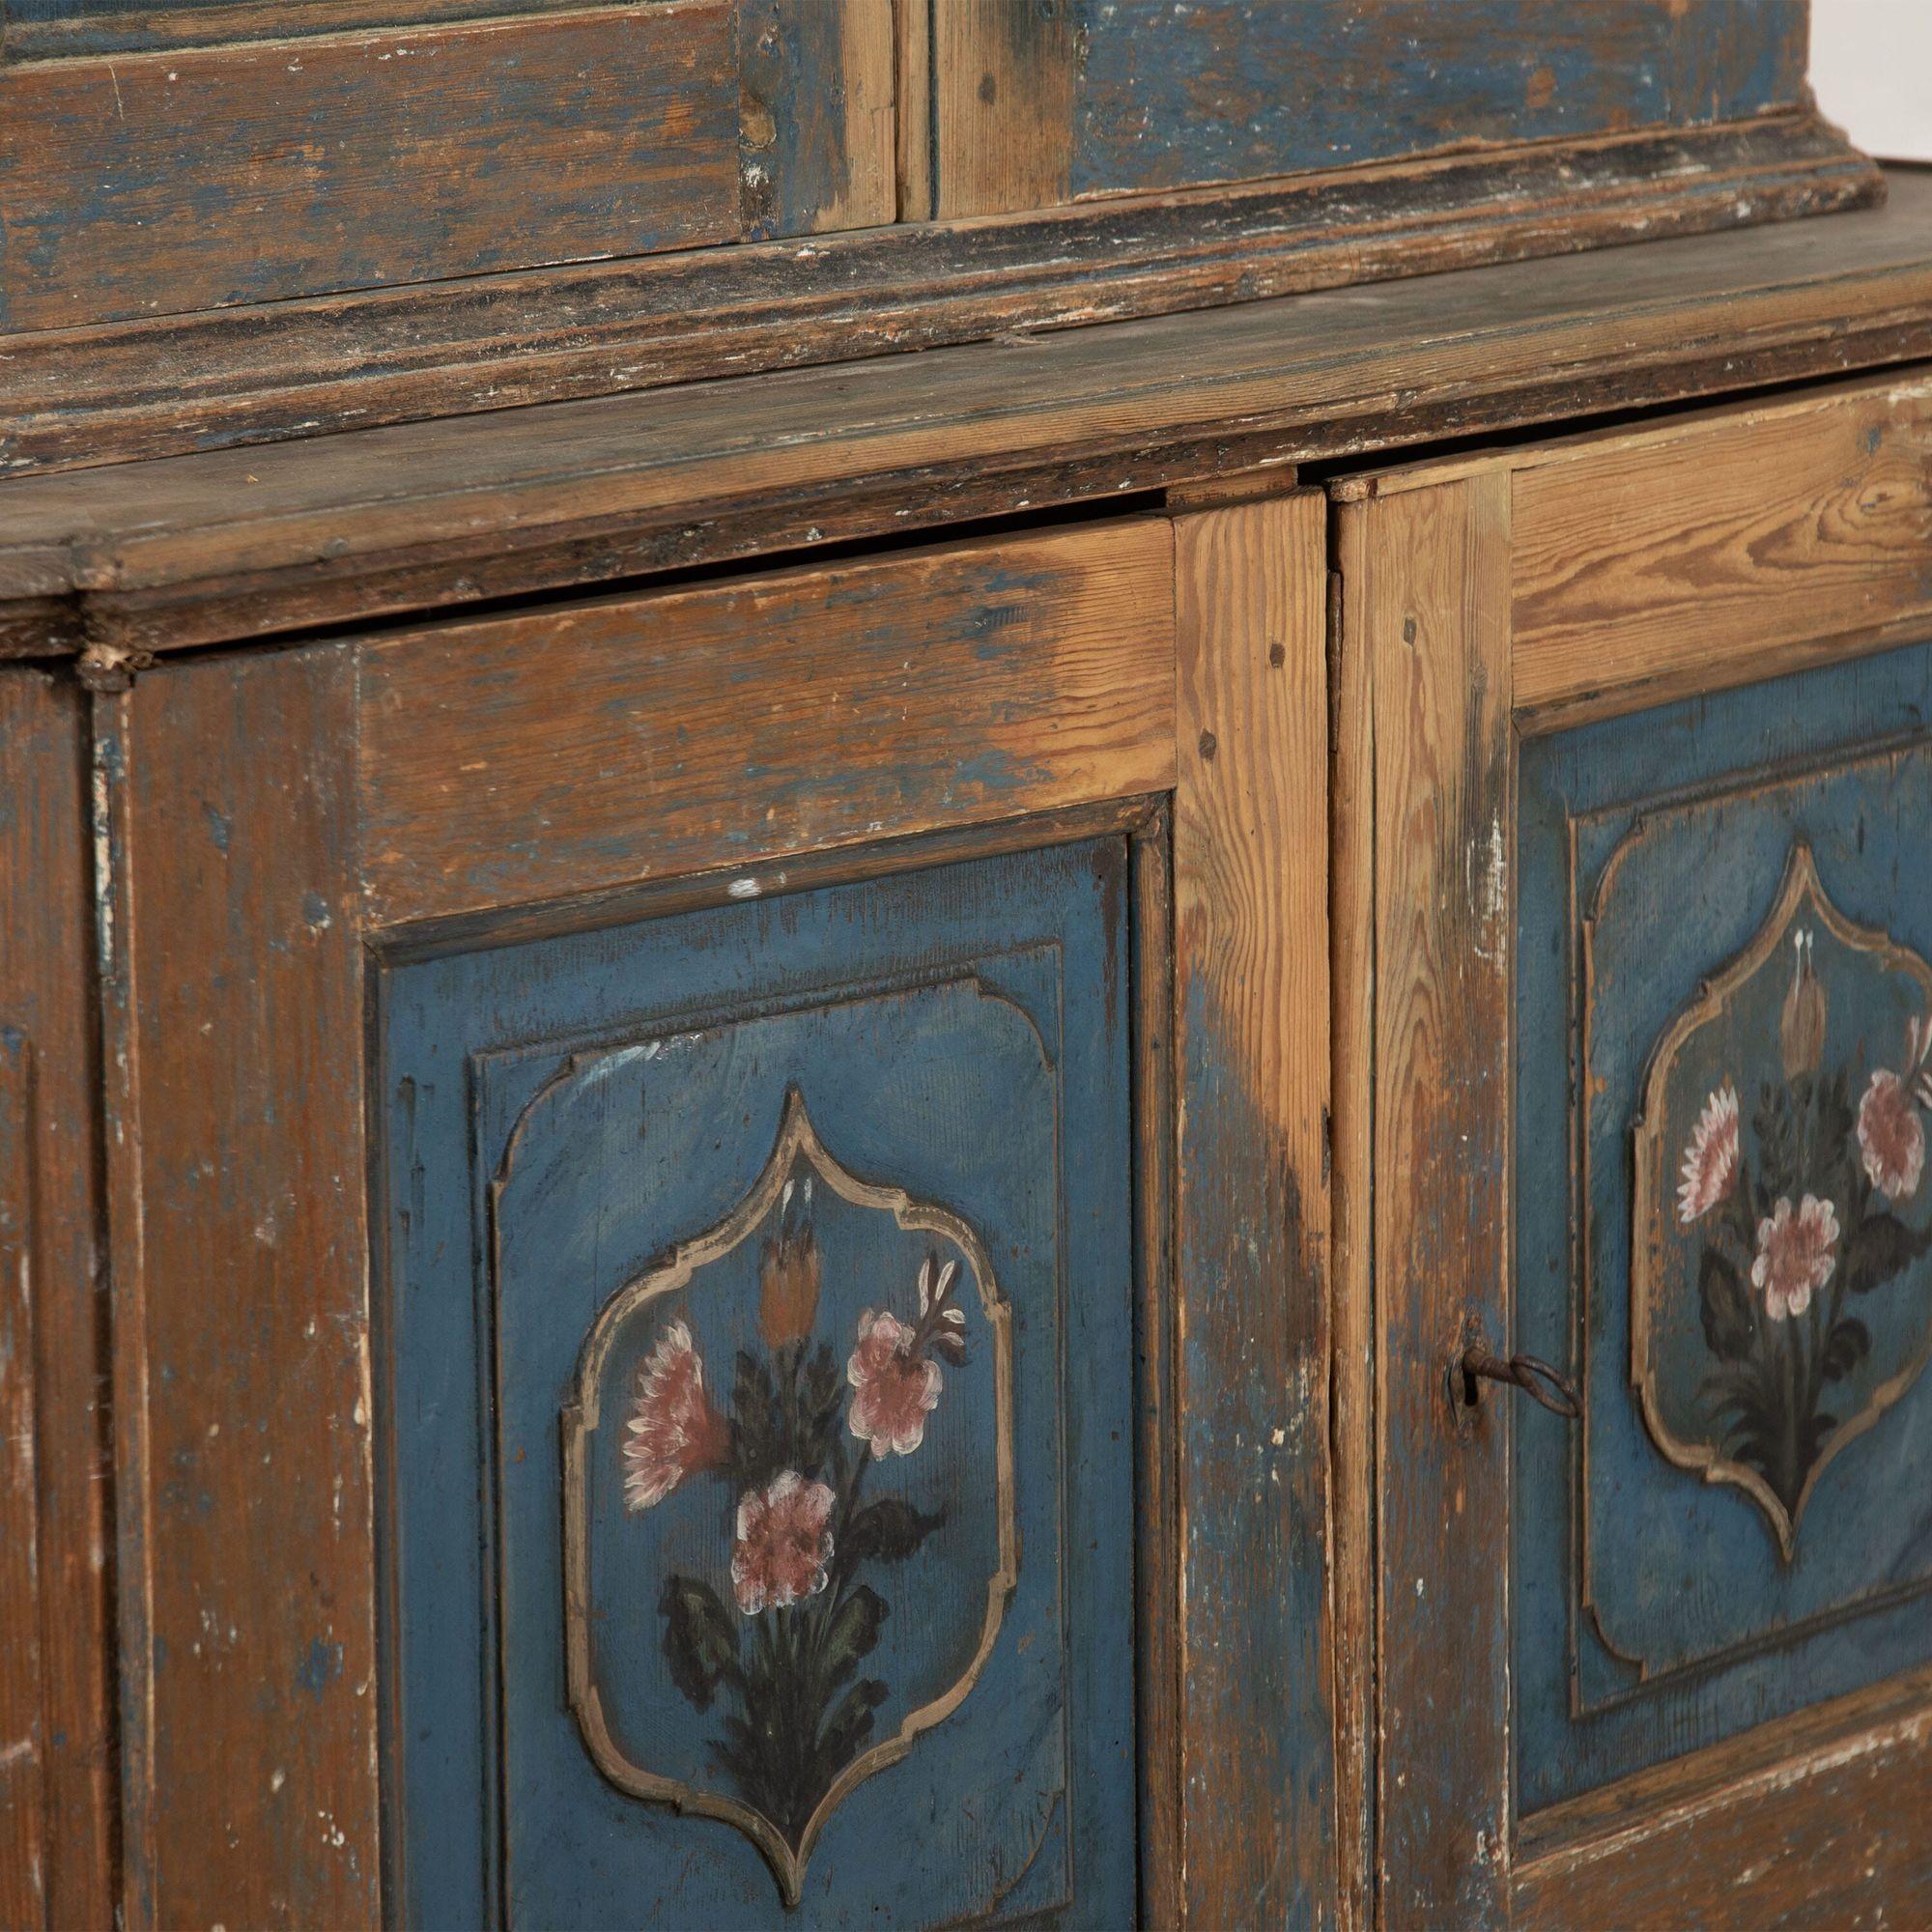 Late 18th century Swedish two-part cupboard in original decoration.
Of unusual form, the cupboard has beautiful constructional details as well as traditional painted decoration.